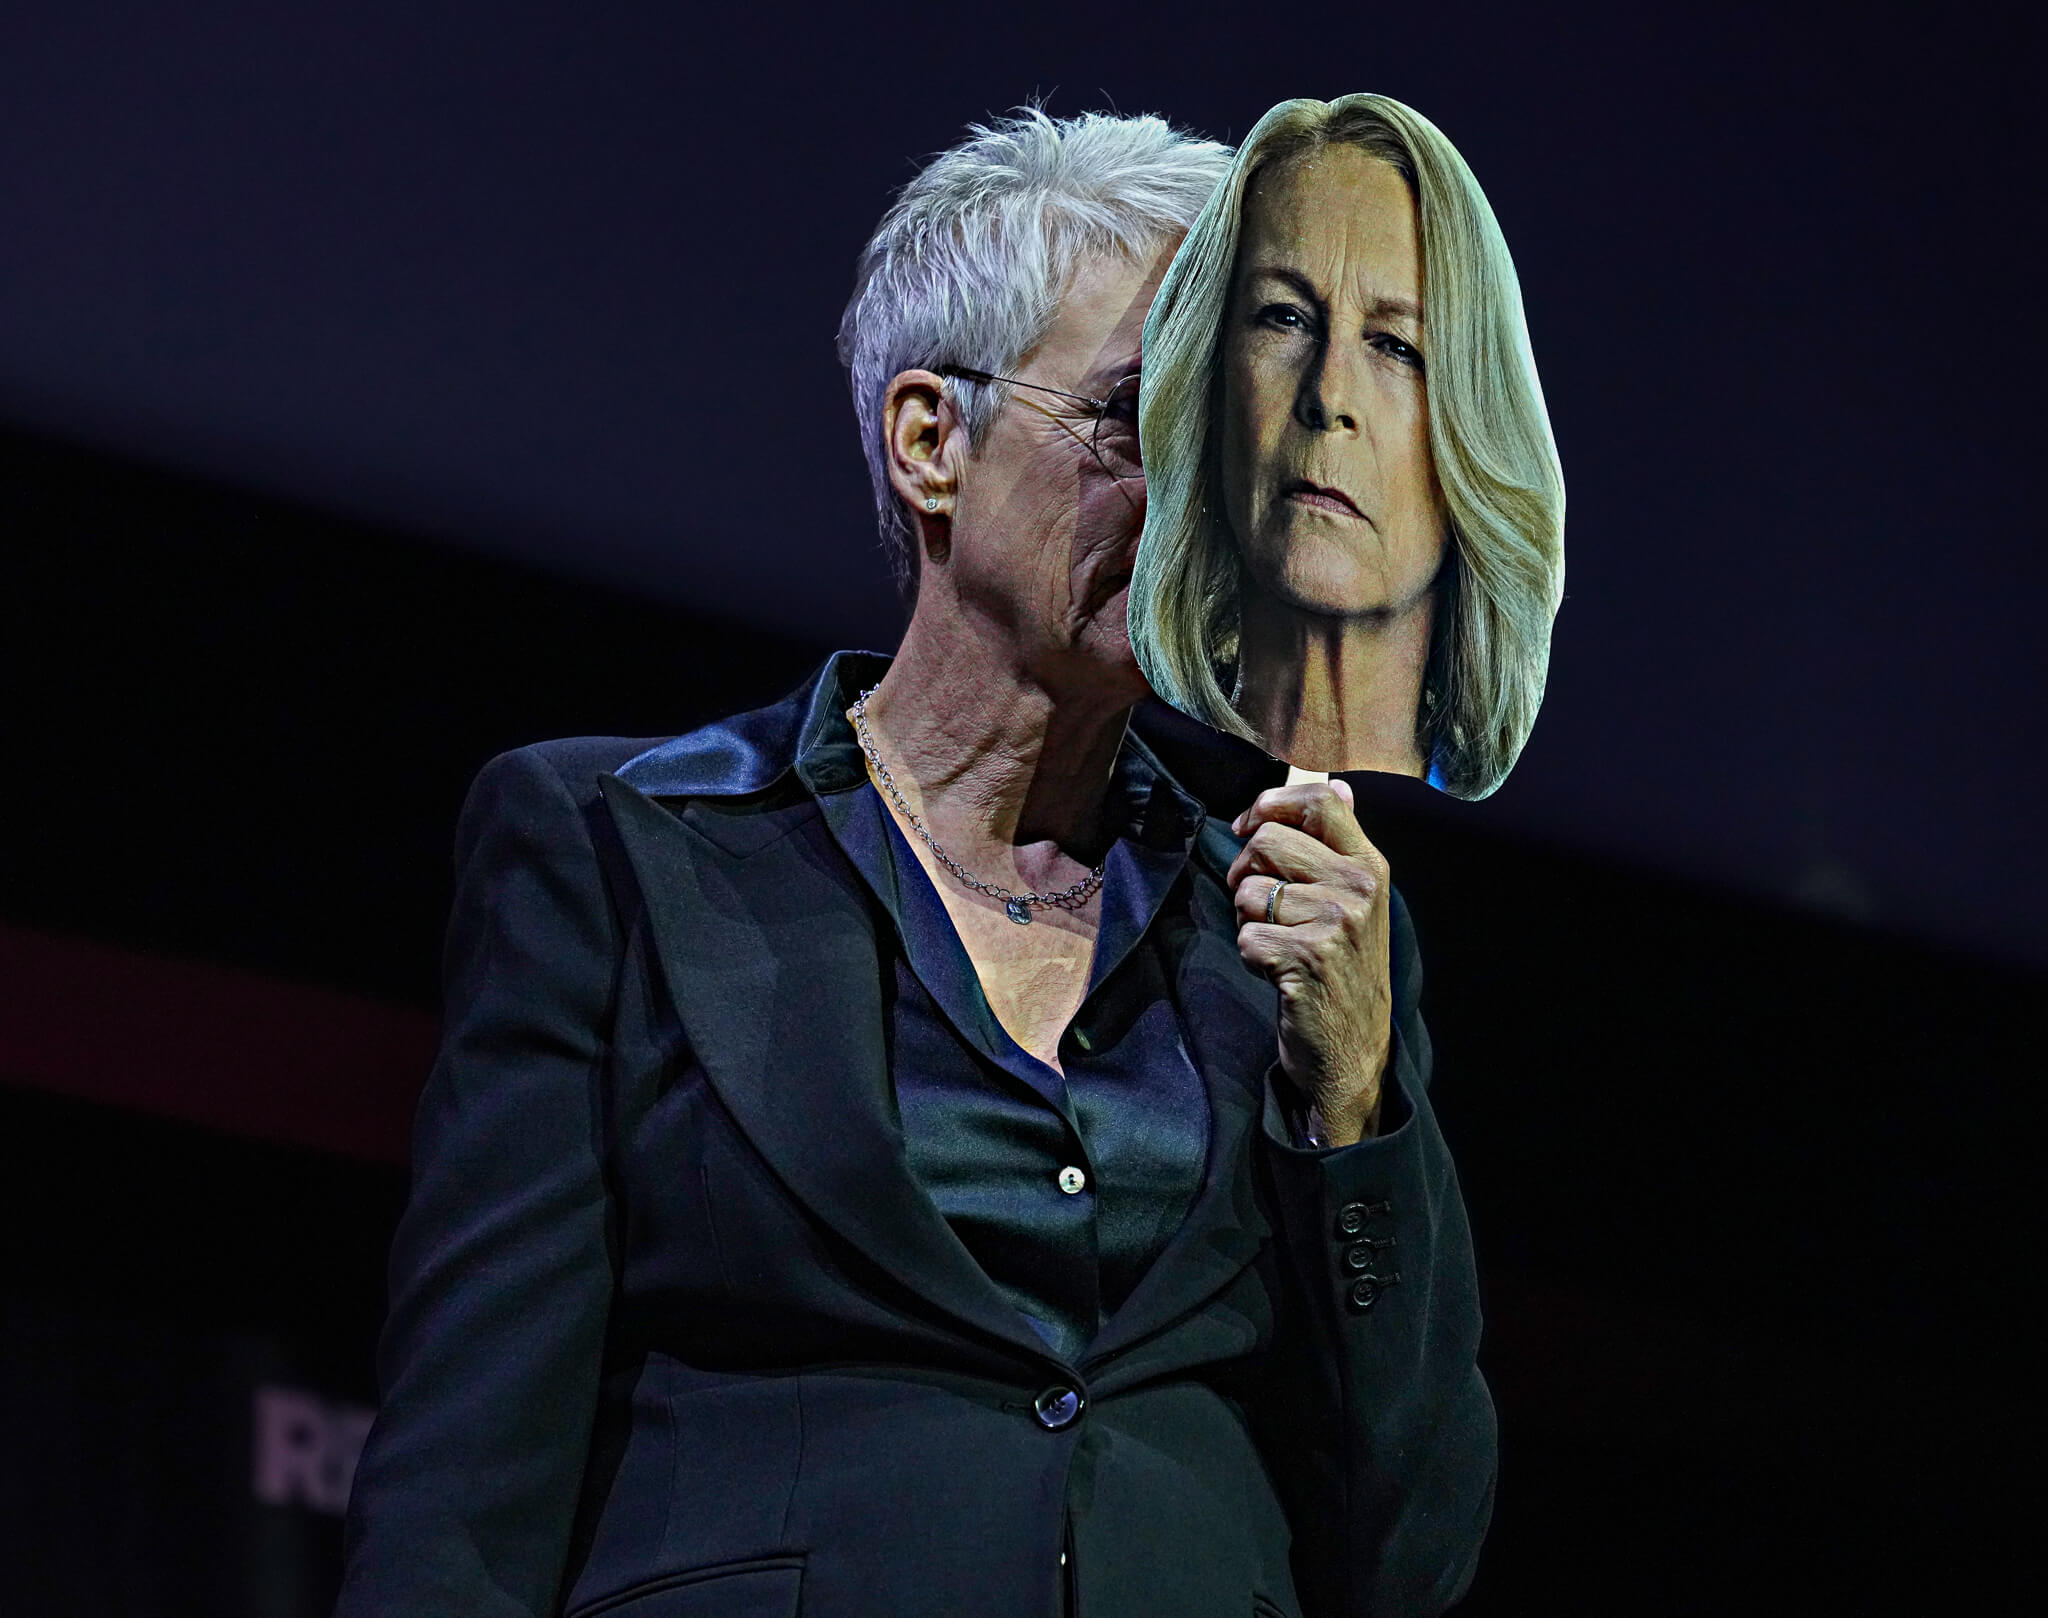 Jamie Lee Curtis with her Halloween character